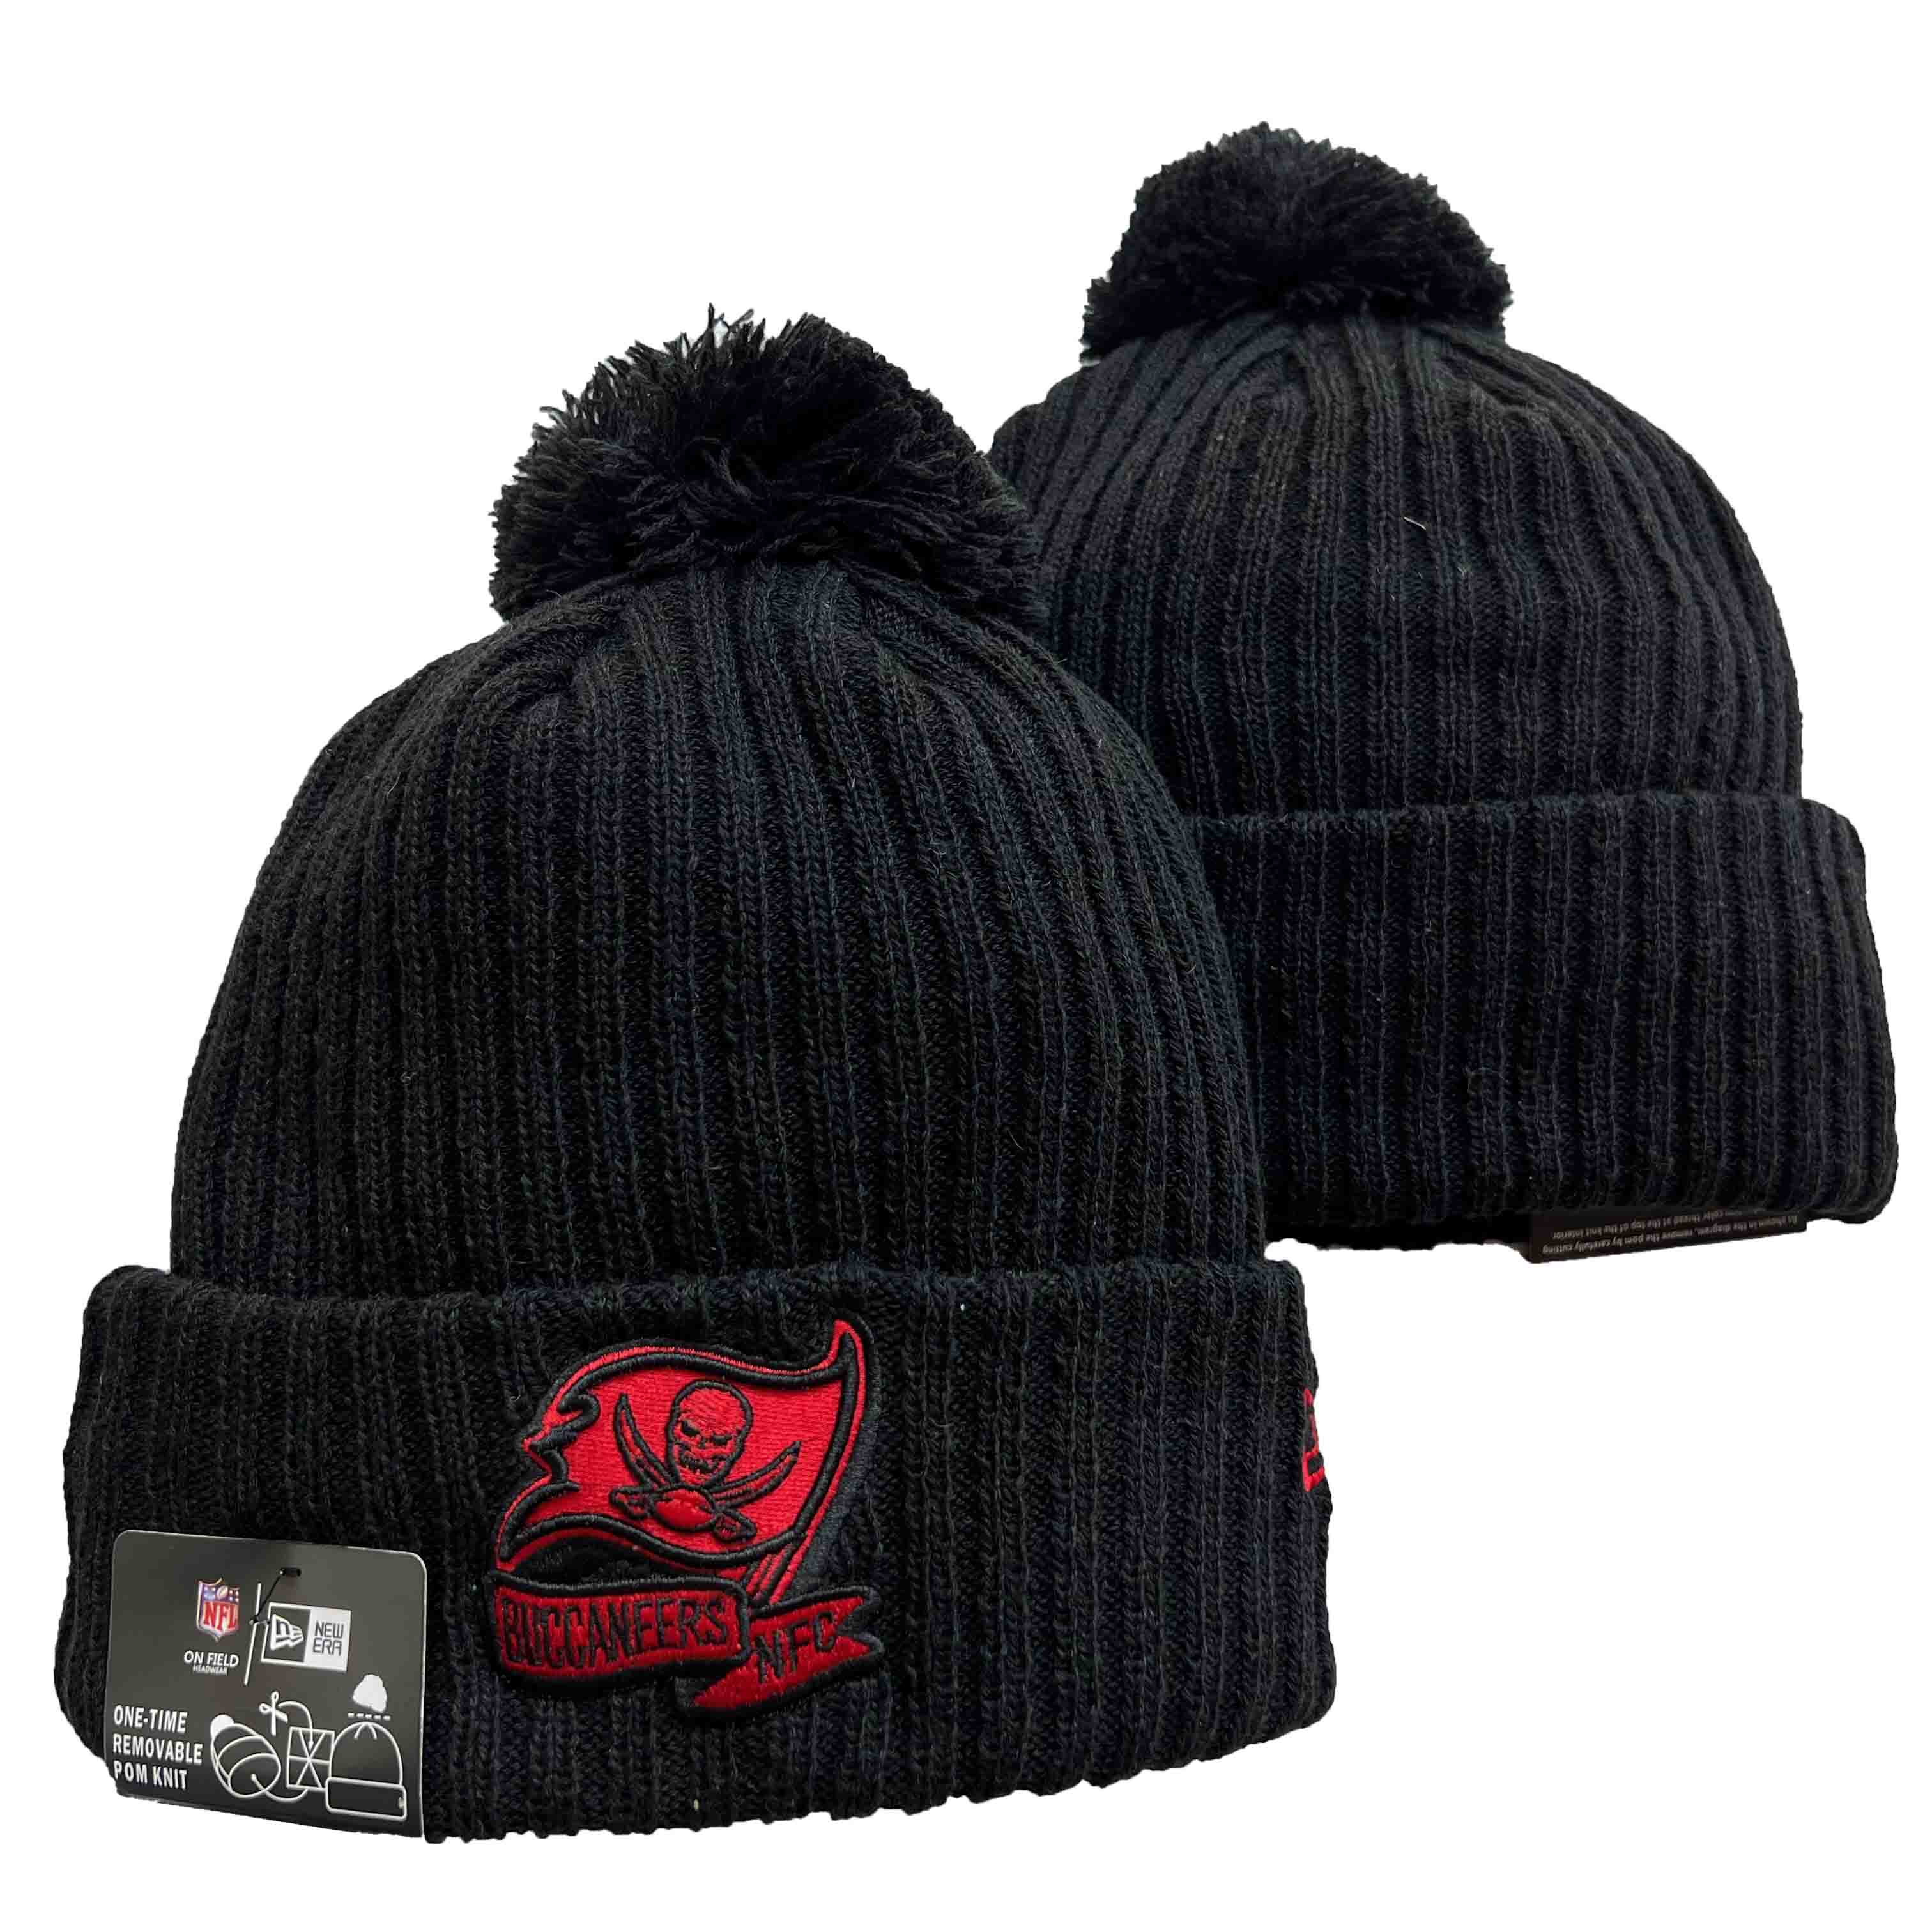 Tampa Bay Buccaneers Knit Hats -7